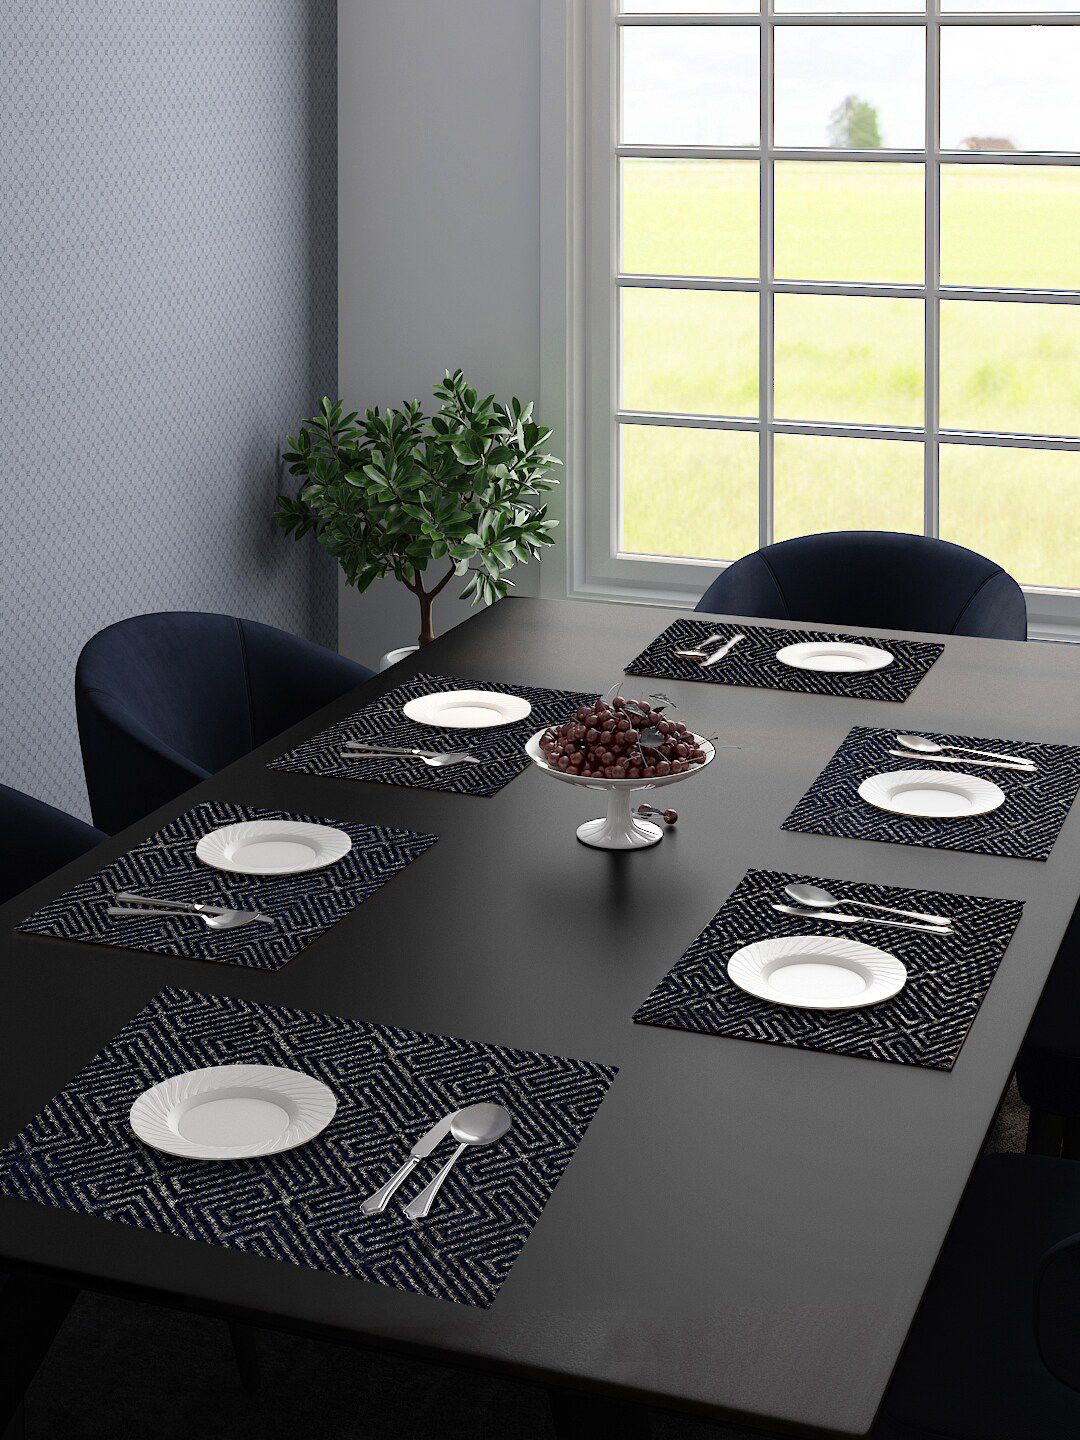 Saral Home Set Of 6 Blue Self-Design Table Placemats Price in India